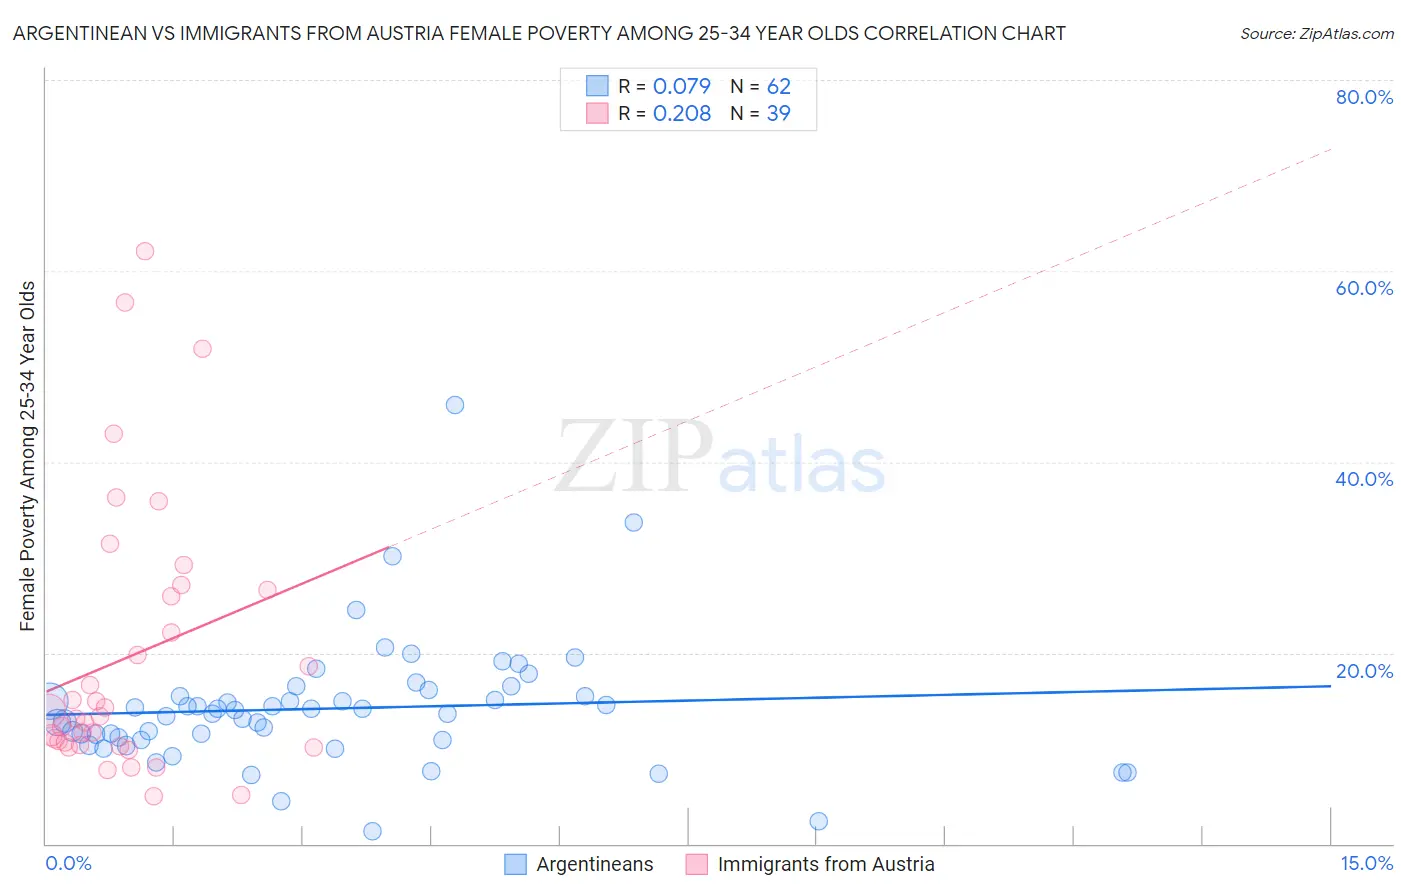 Argentinean vs Immigrants from Austria Female Poverty Among 25-34 Year Olds